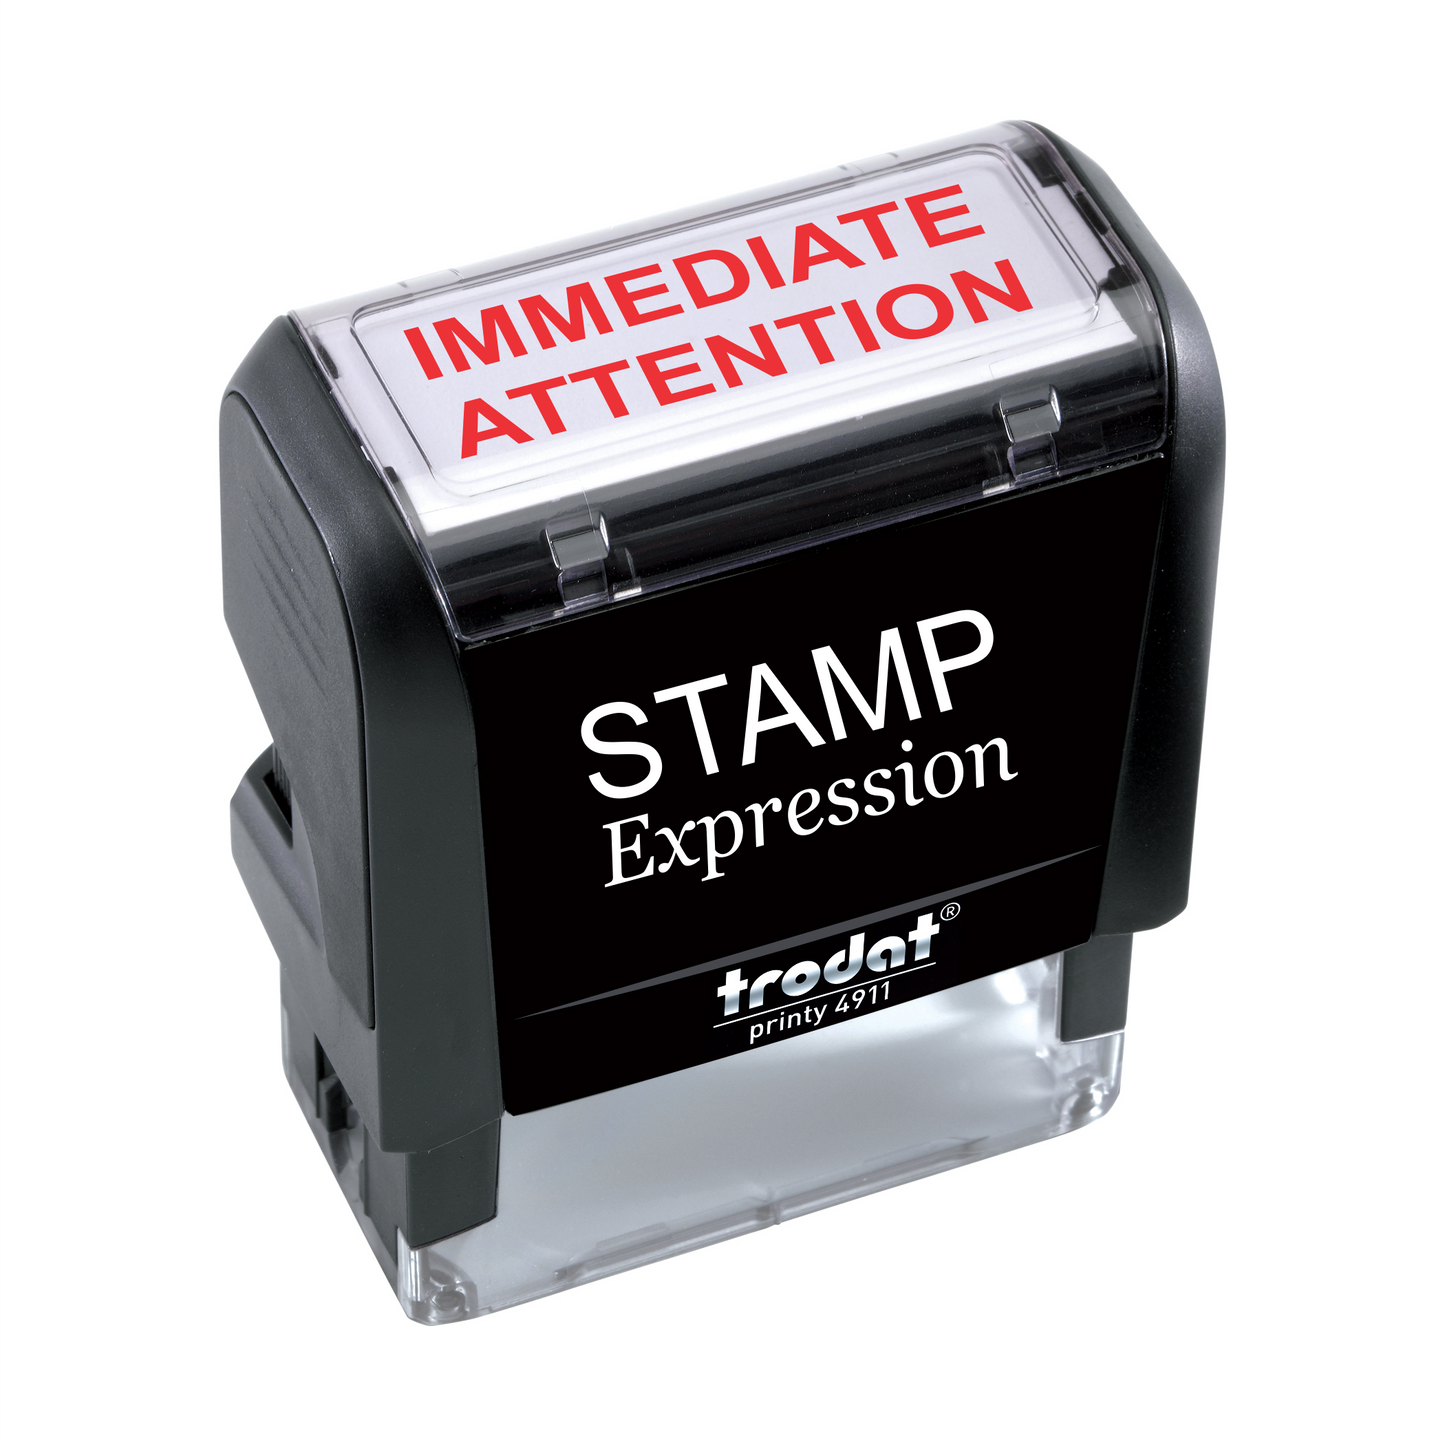 Immediate Attention Office Self Inking Rubber Stamp (SH-5032)